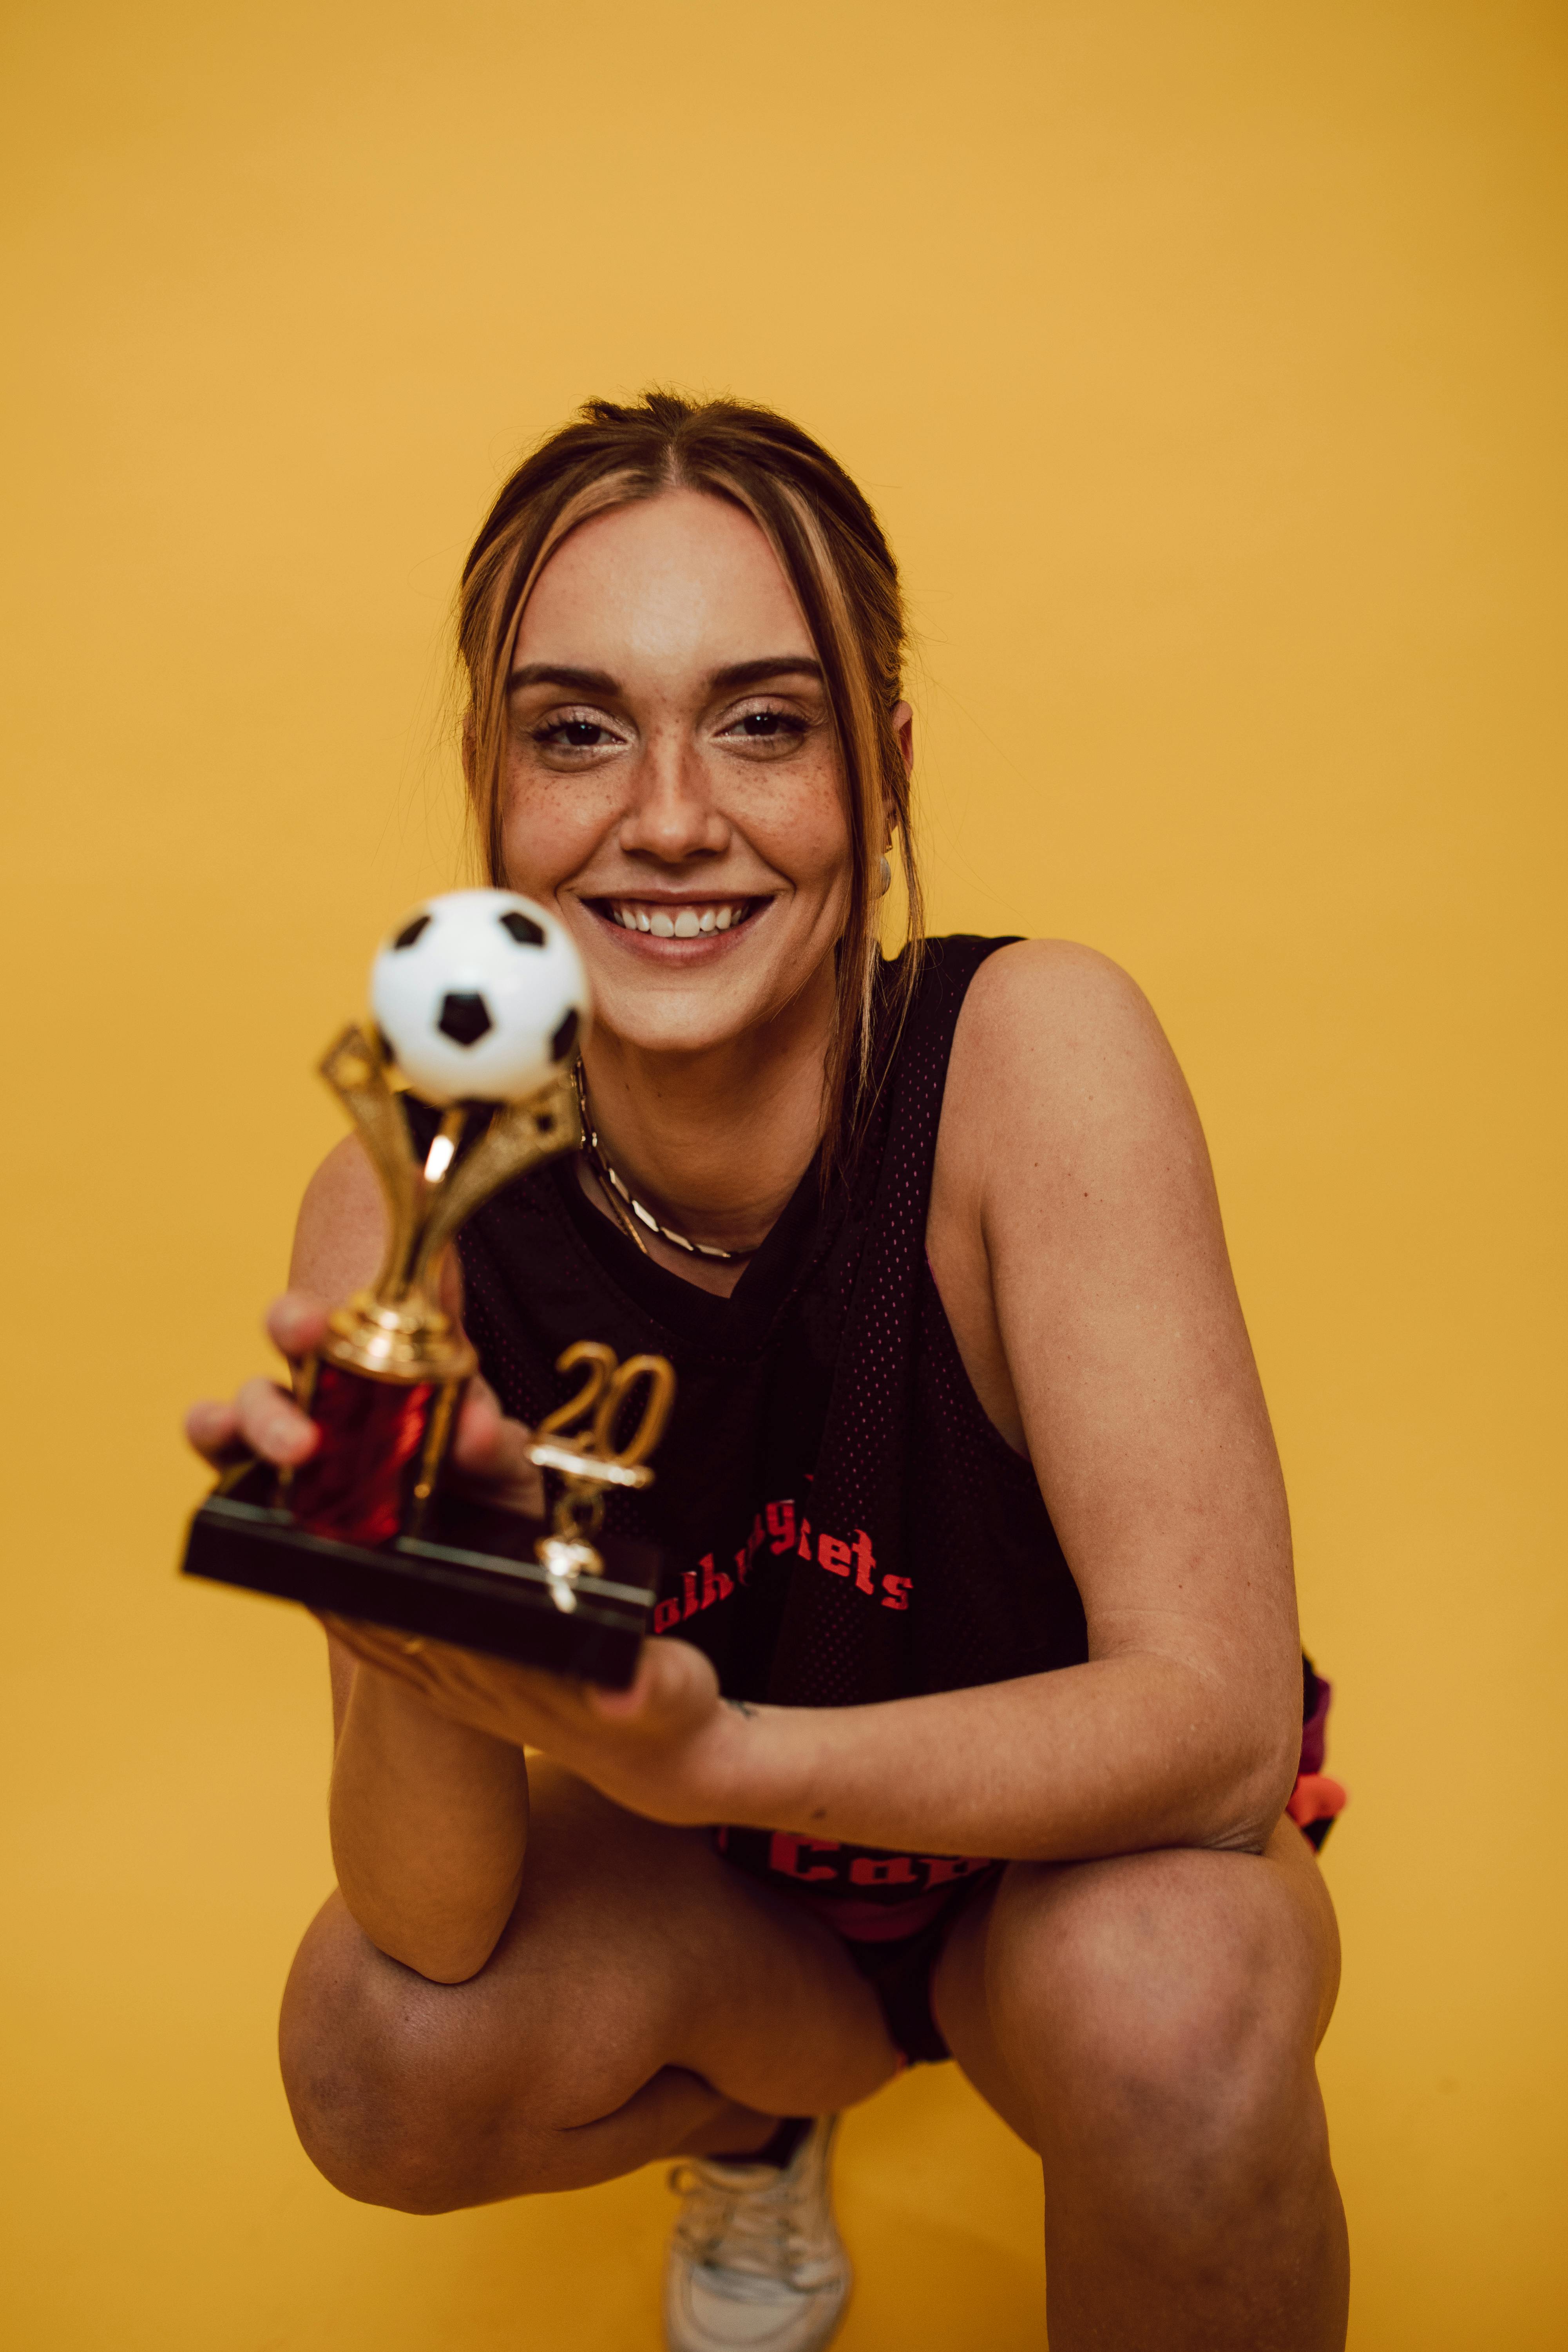 a smiling woman holding a trophy